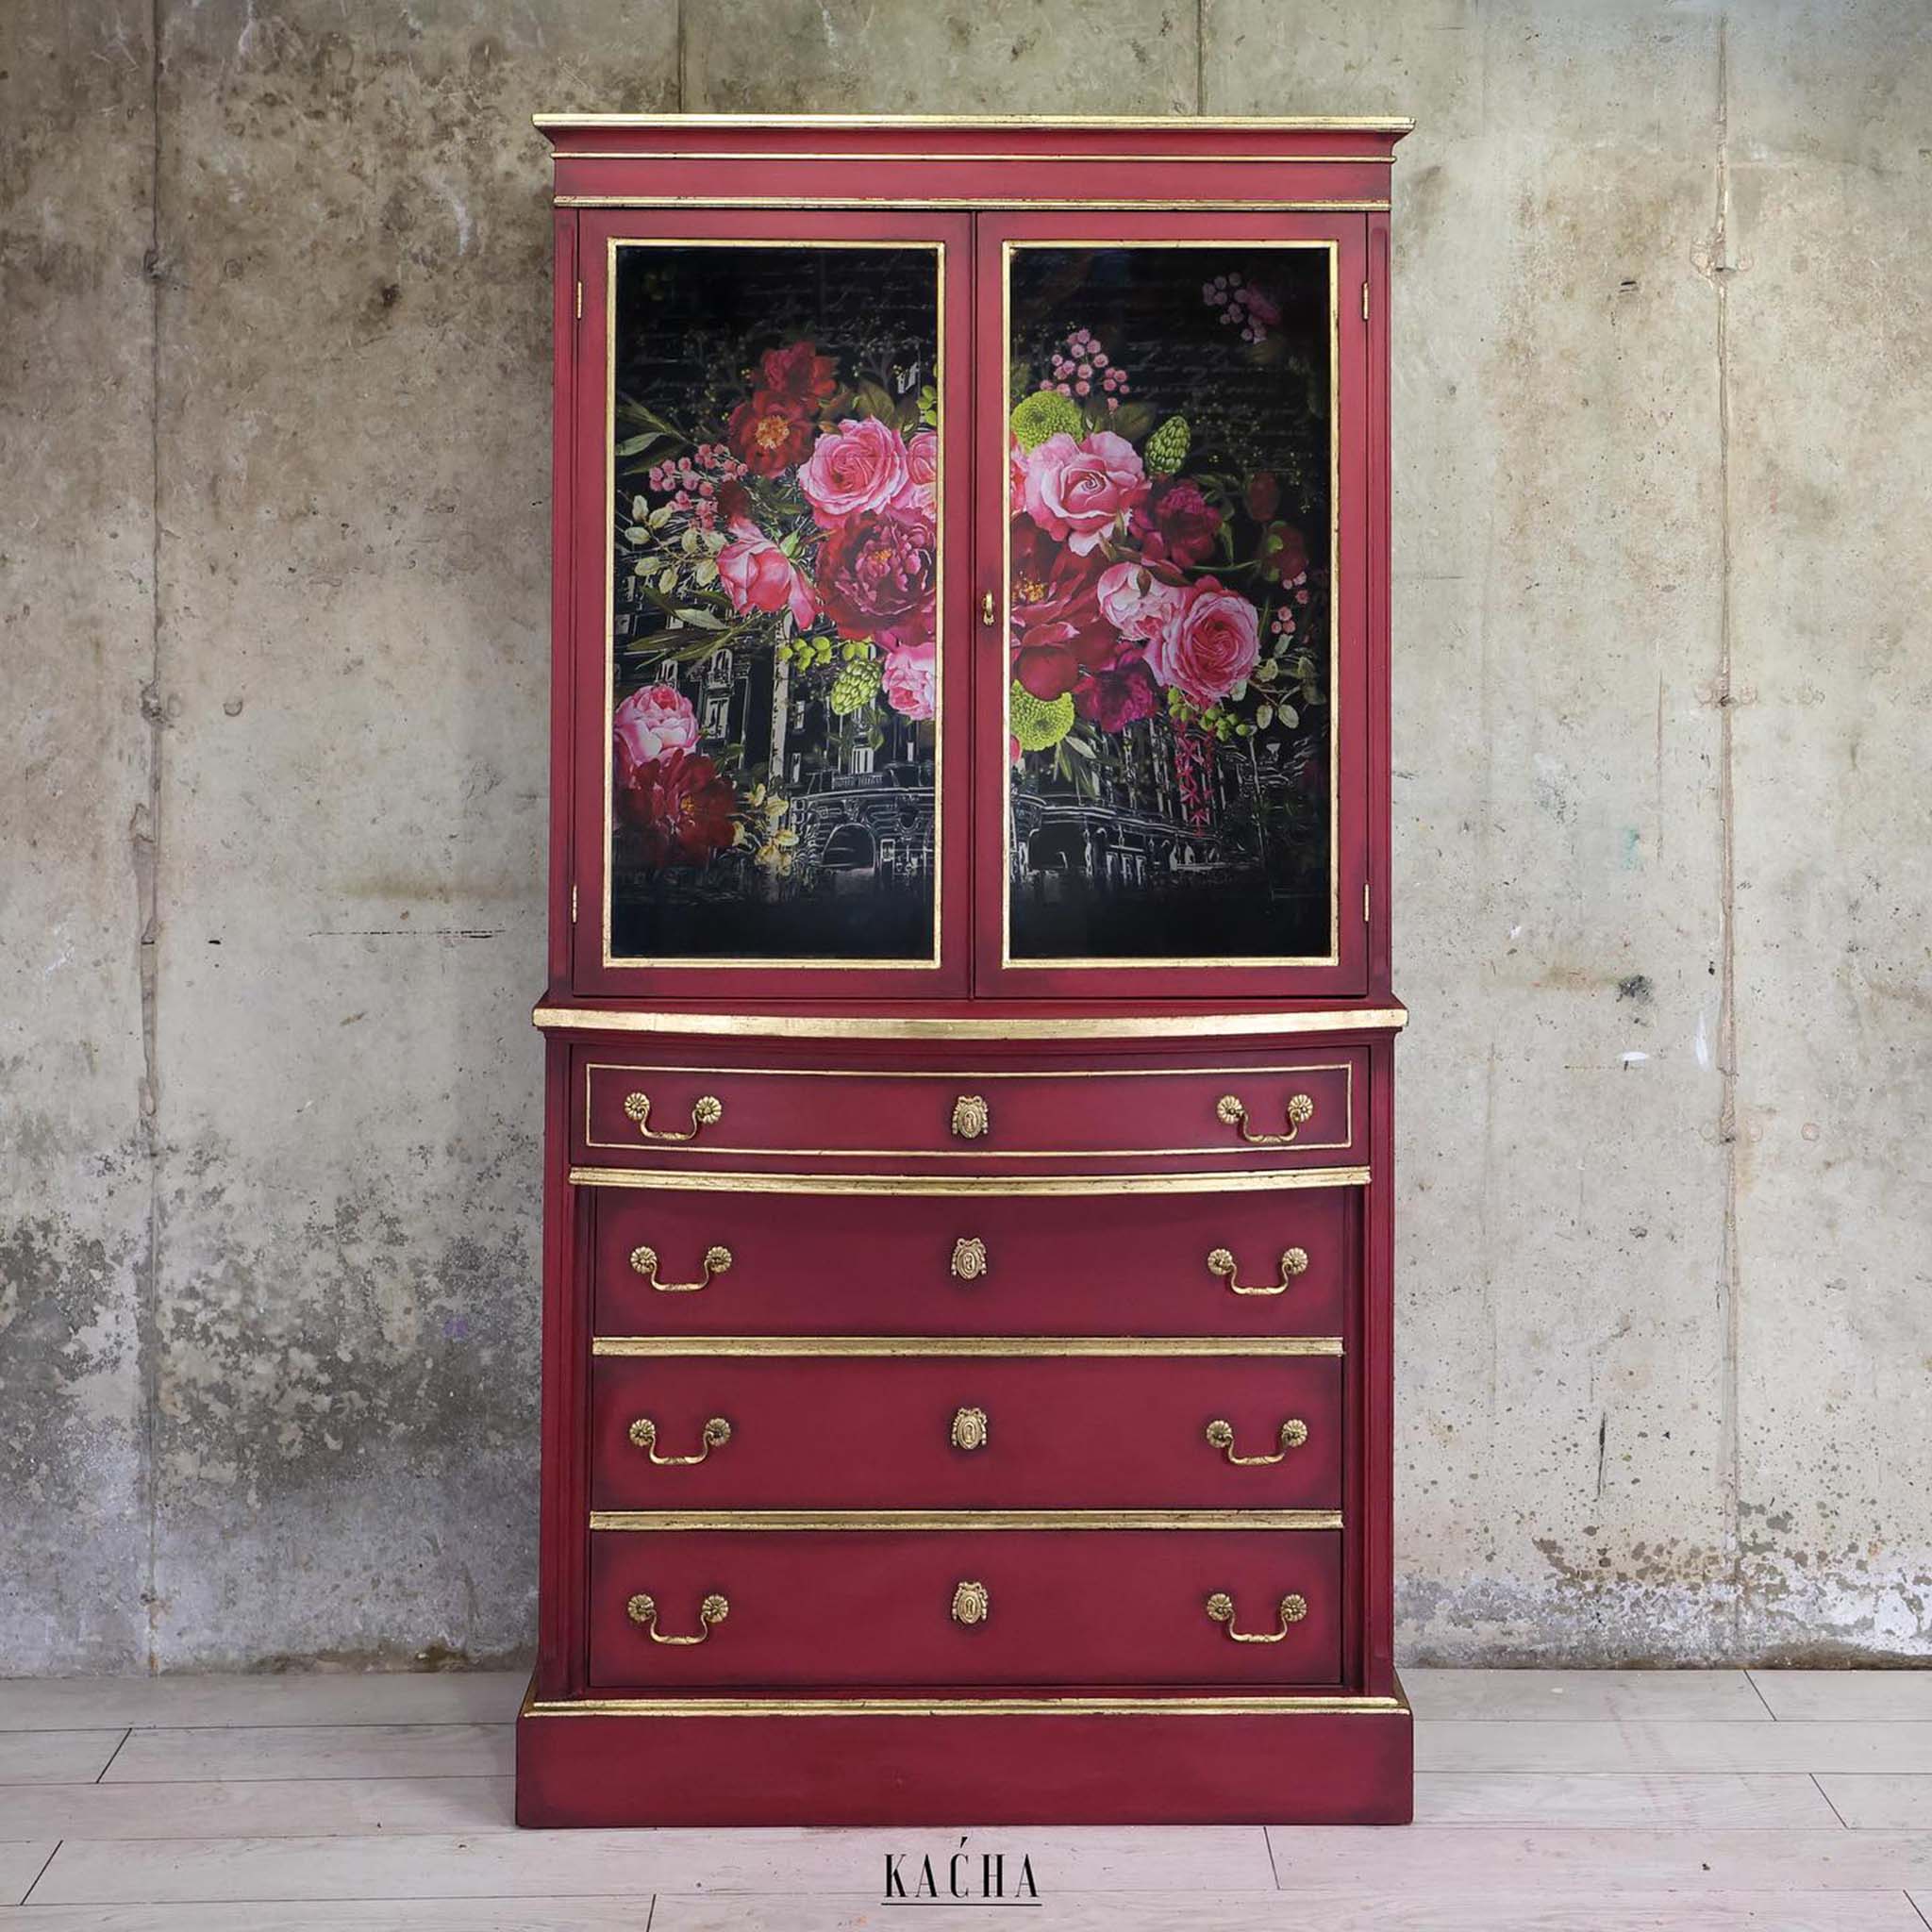 A vintage armoire refurbished by Kacha is painted dark red with gold accents and features ReDesign with Prima's Royal Burgundy transfer on its doors.